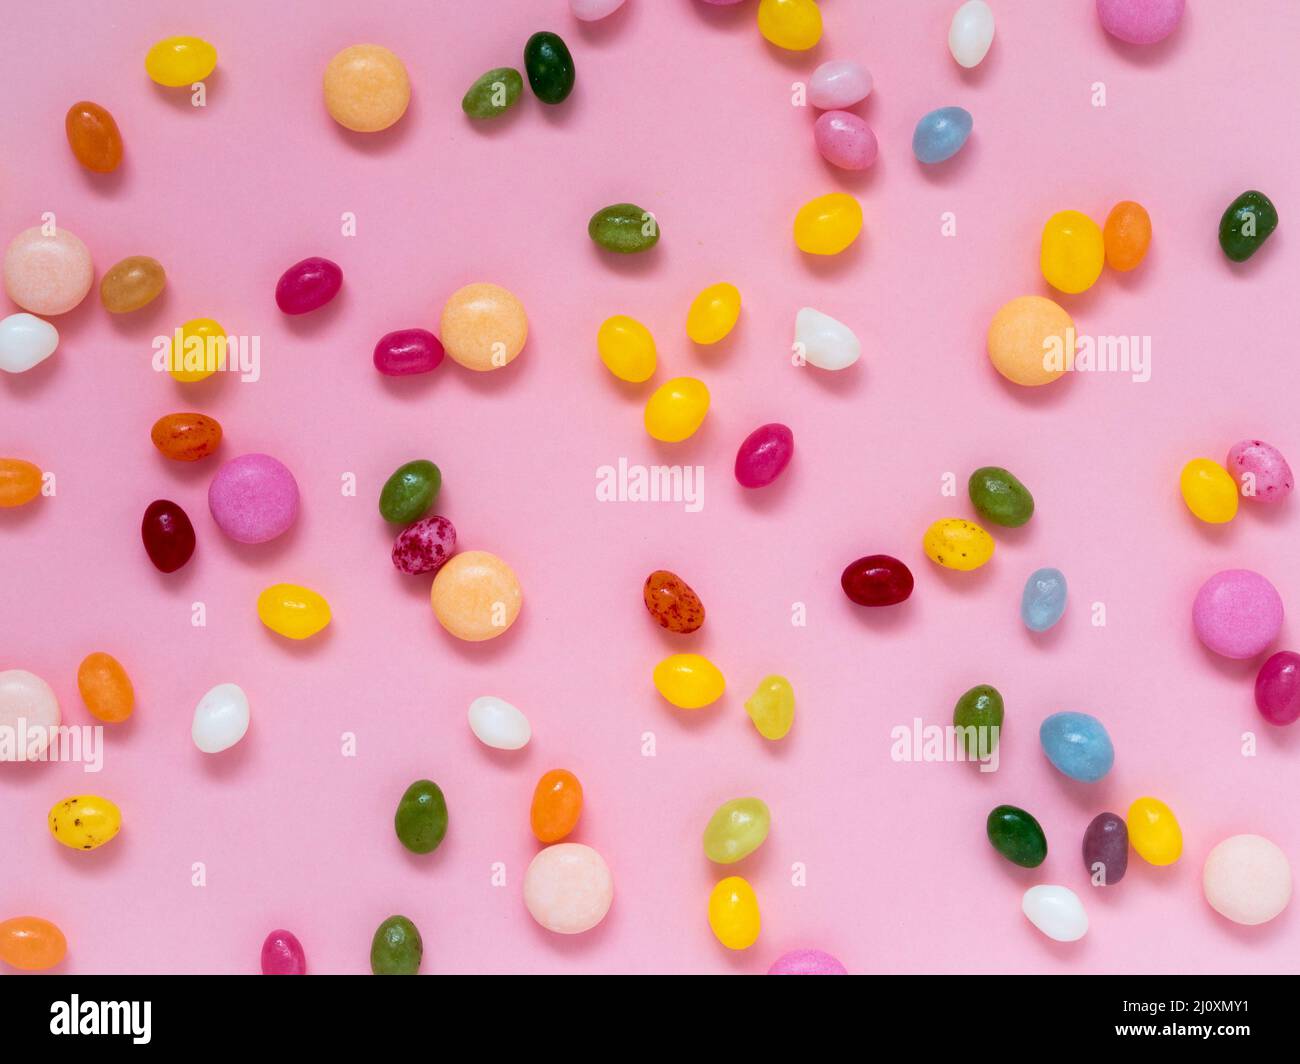 Many scattered colorful sweets, candies, lollipops Stock Photo